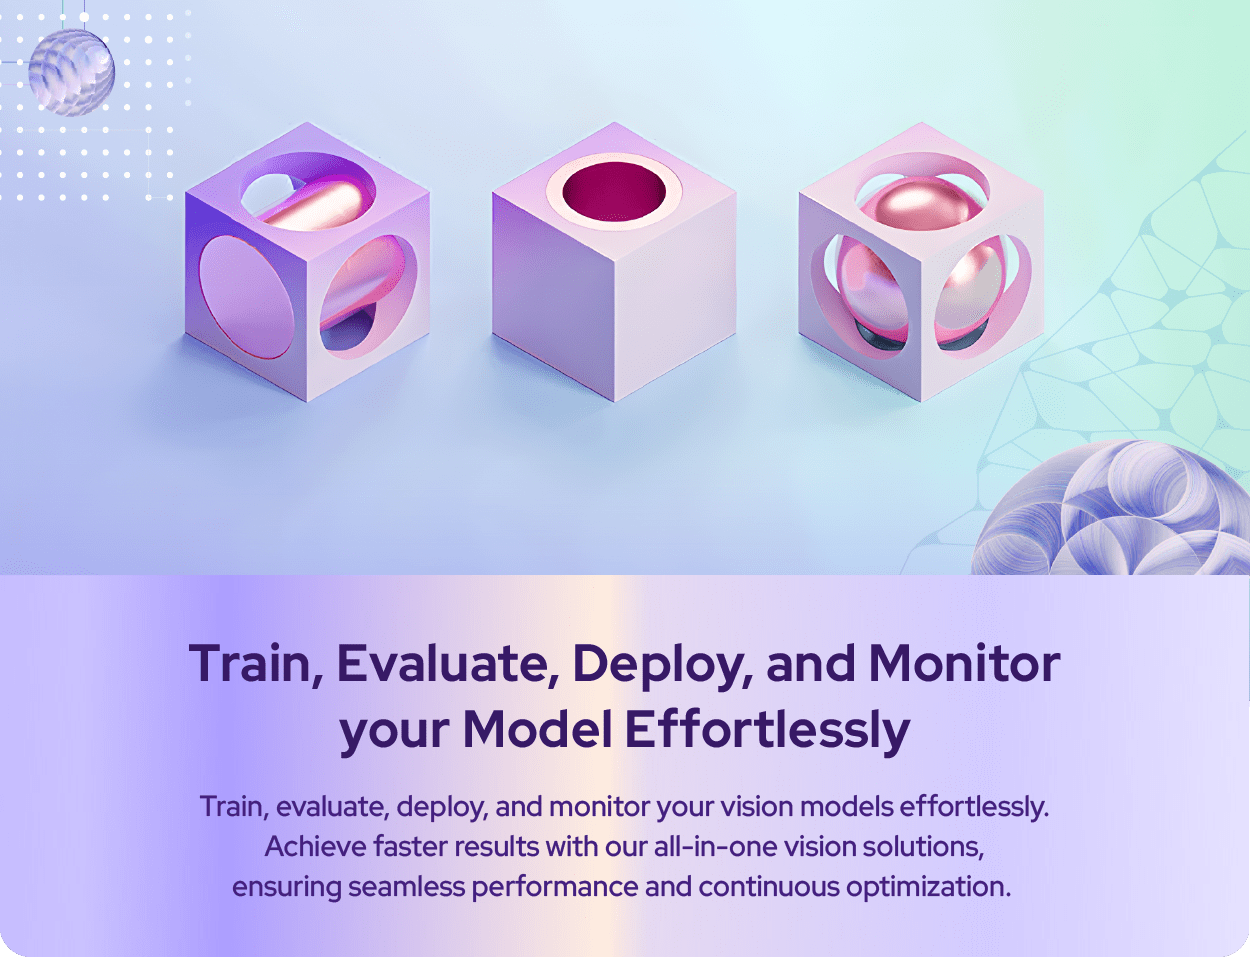 train-eevaluate-deploy-and-monitor-models